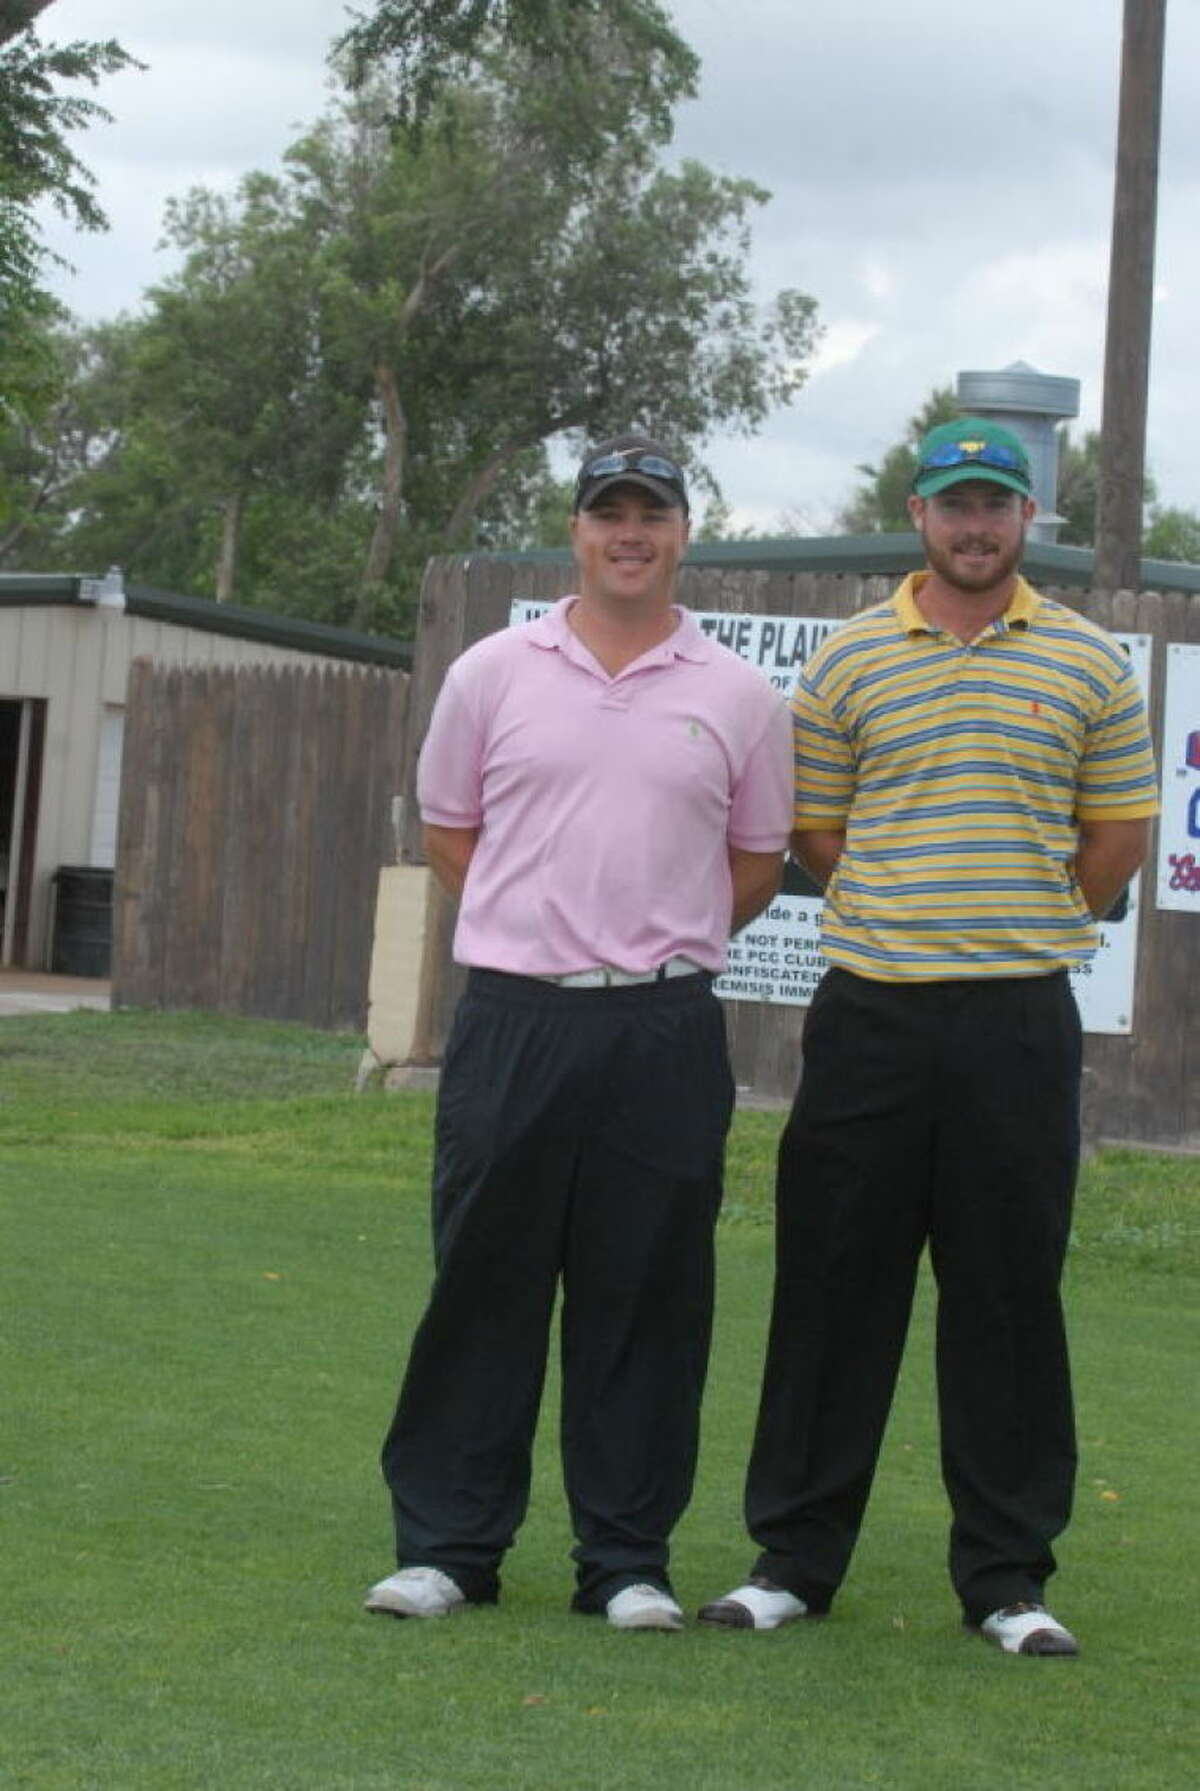 Chris McAlister (left) and Shannon Allen won the Jack Williams Invitational Golf Tournament at Plainview Country Club in a sudden death playoff Monday morning. It was the third consecutive title in the event for McAlister. Allen was playing in the tournament for the first time.